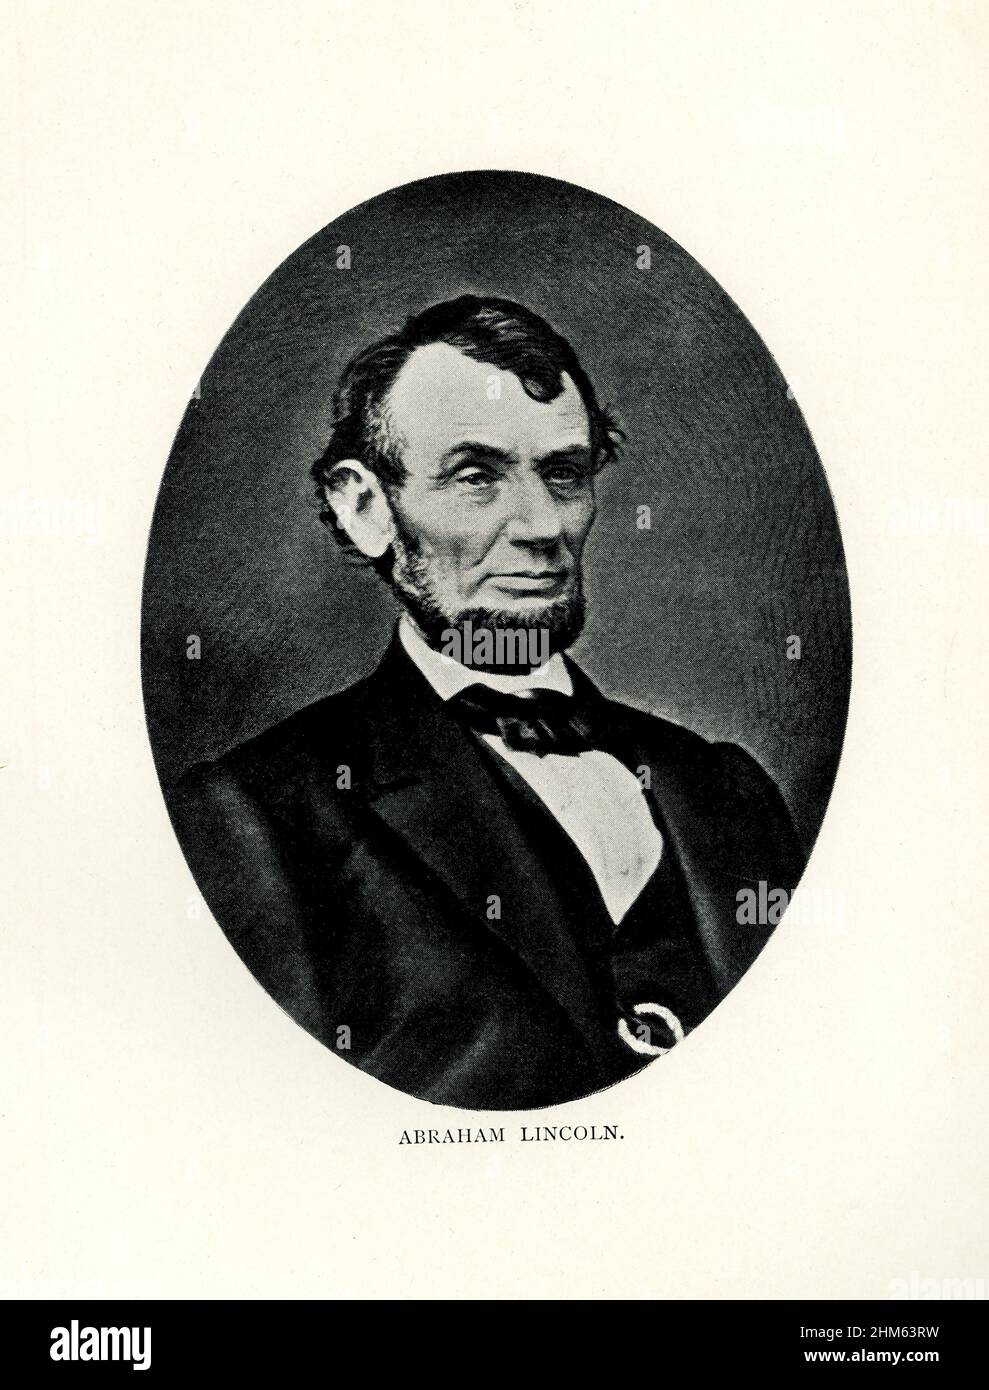 Abraham Lincoln was the 16th president of the United States. He served from March 1861 to his assassination on April 15, 1865. Stock Photo